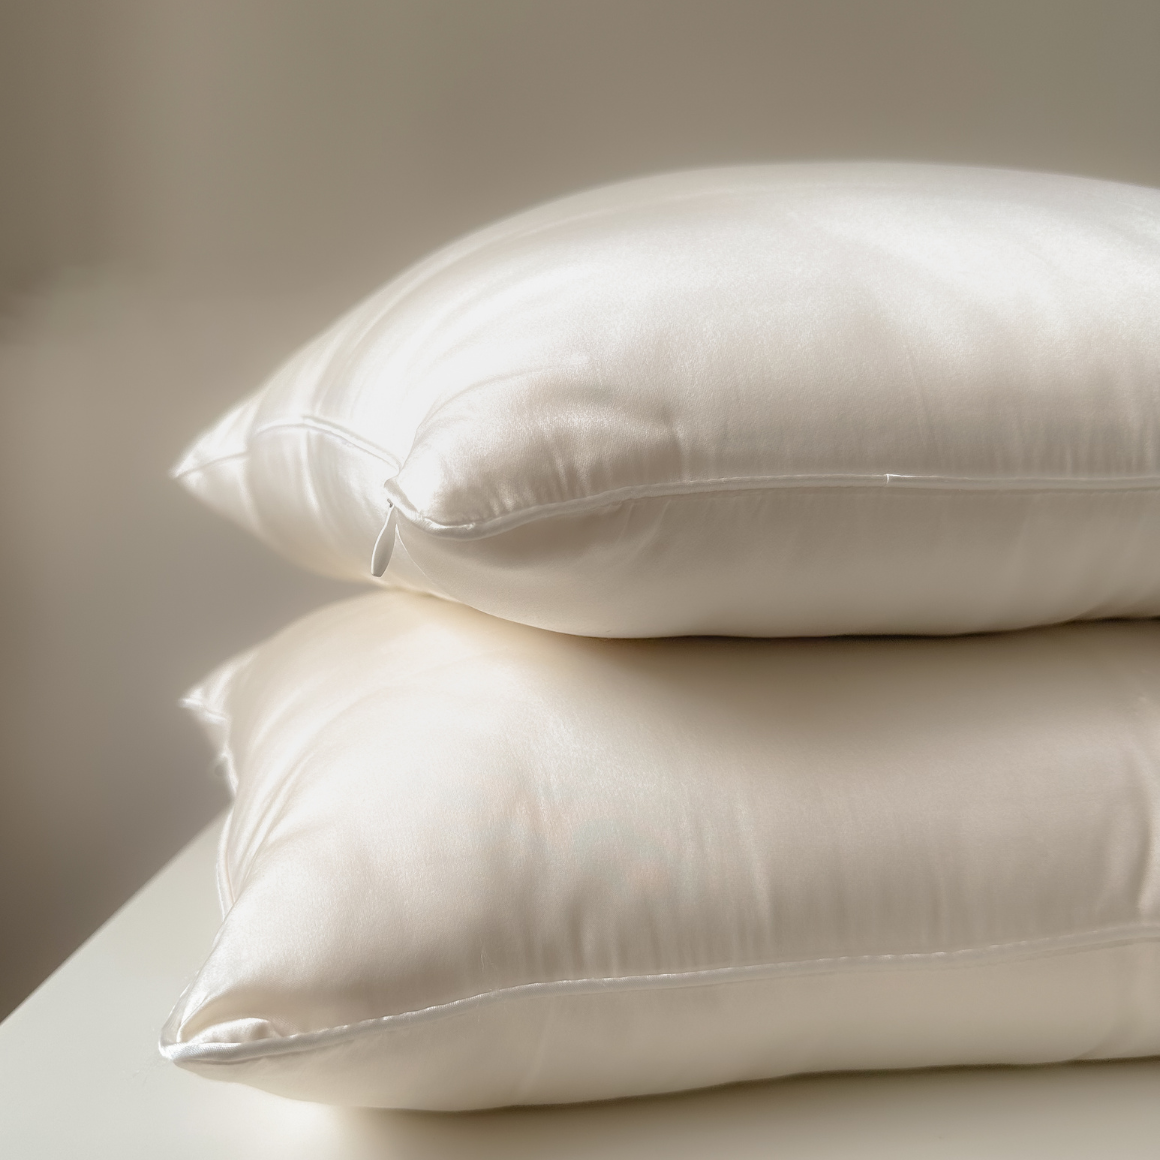 Best hypoallergenic silk pillow for sleep. Filled with 100% Silk Floss inside a layer of Feather Silk Cotton. Singapore Weavve Home Silk Pillow Collection.